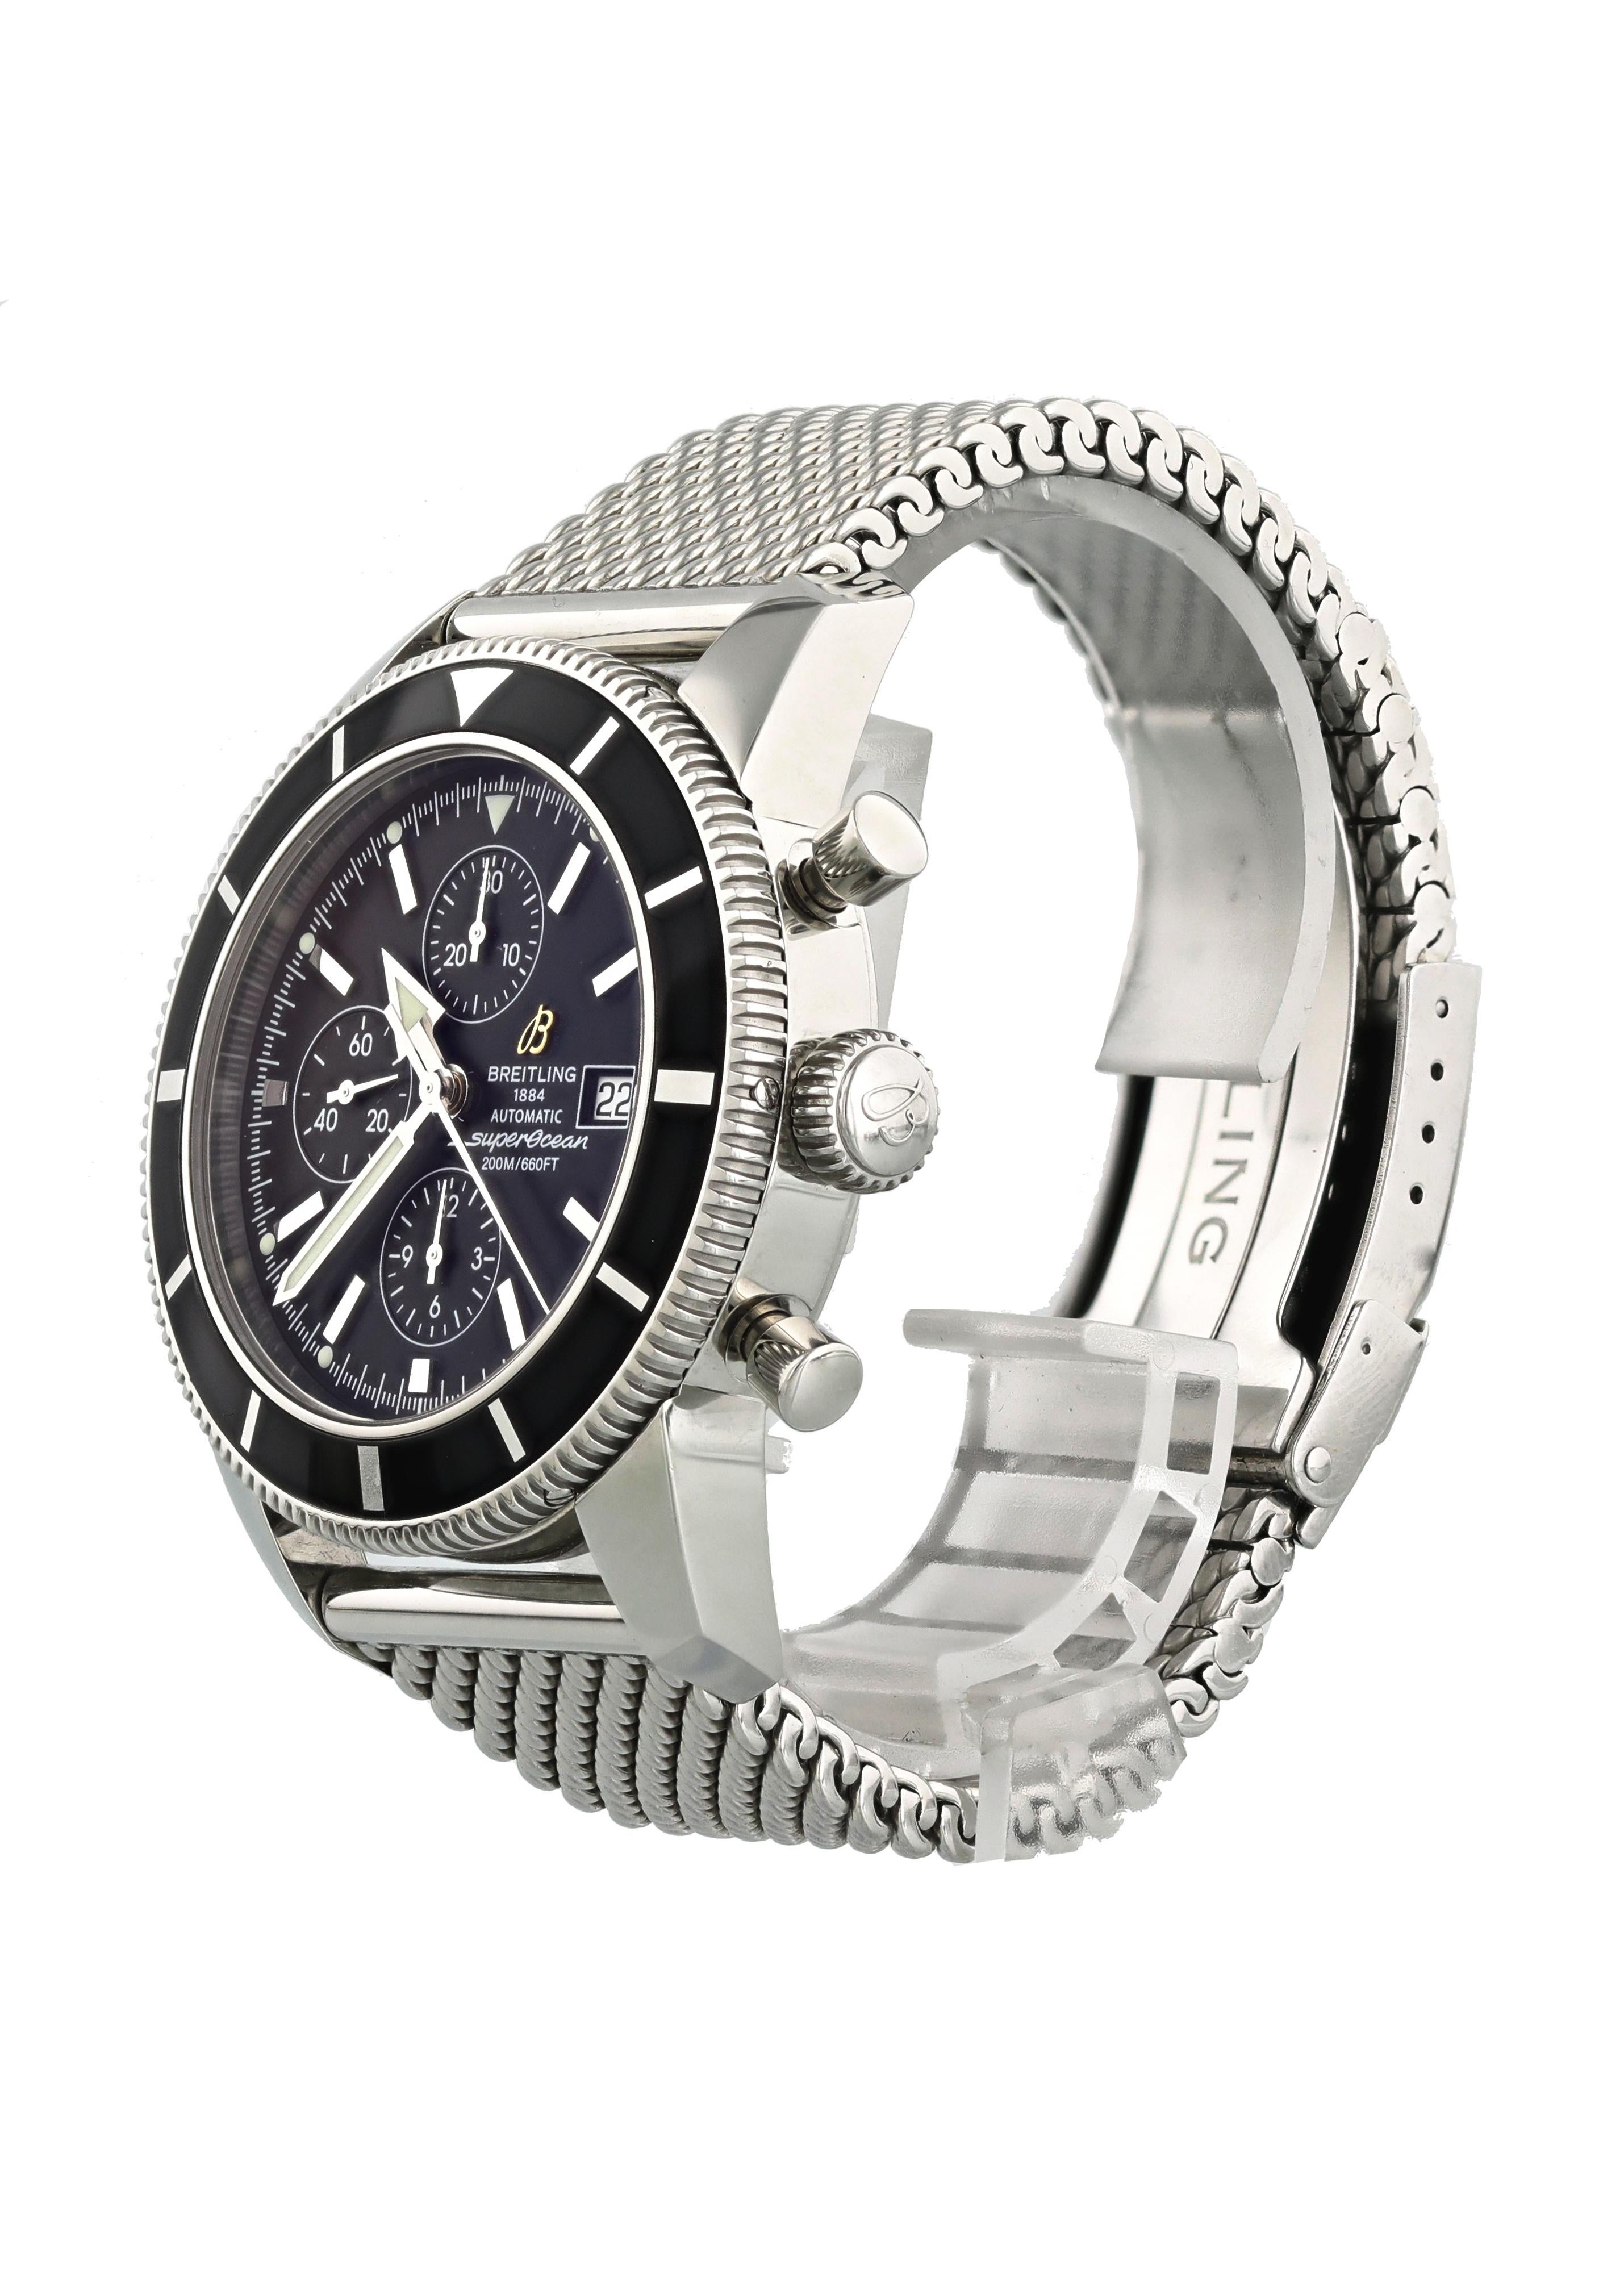 Breitling SuperOcean A13320 Mens Watch. 46mm stainless steel case with a Uni-directional rotating black bezel. Black dial with silver-tone hands and index hour markers. Minute markers around the outer dial. Date display at the 3 o'clock position.